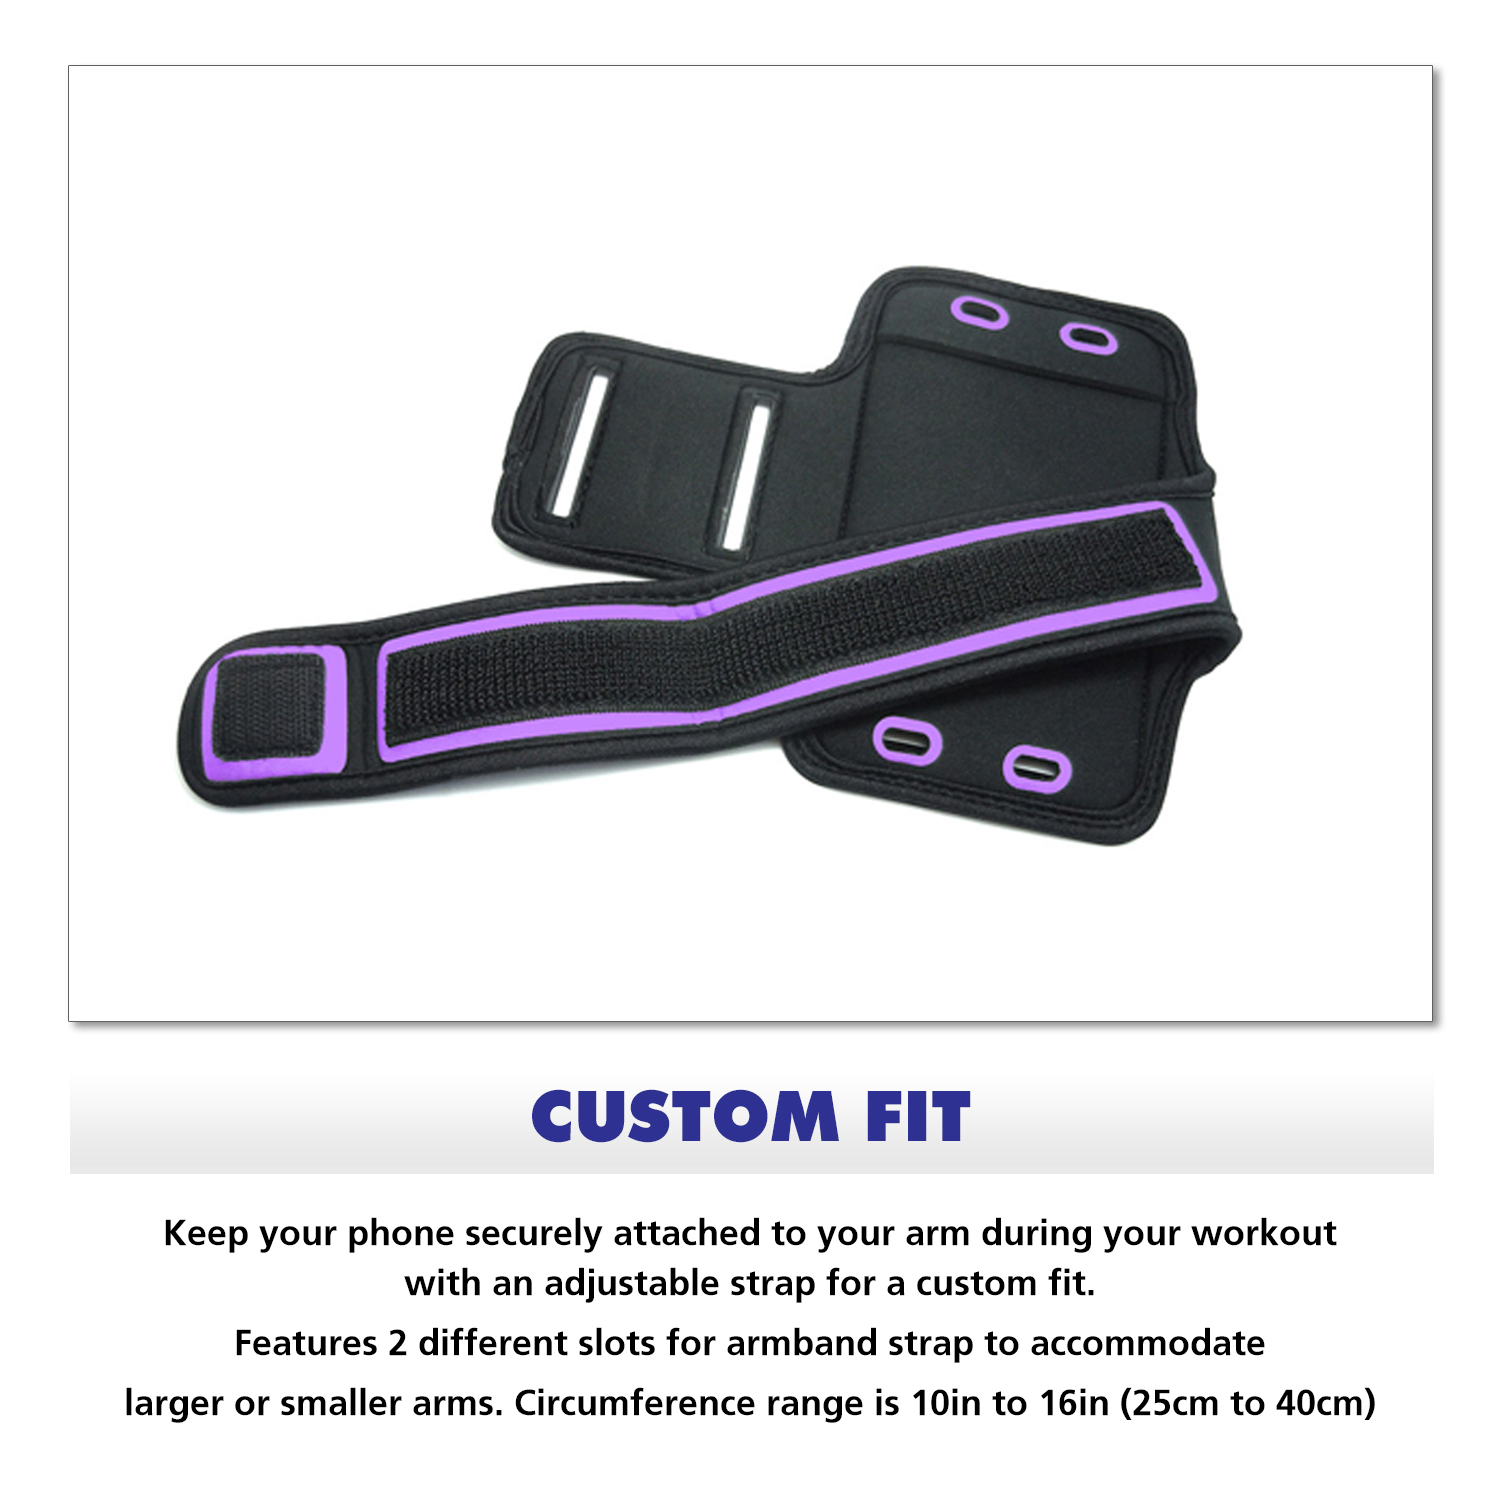 RND Slim-Fit Active Sports Armband Case for iPhone (SE, 5, 5C, 5S, 6, 6S, 7), Samsung Galaxy (S4, S5, S6, S7) LG, Moto, OnePlus, HTC, Google Pixel, Blackberry, Microsoft Smartphones and more (purple) - image 4 of 9